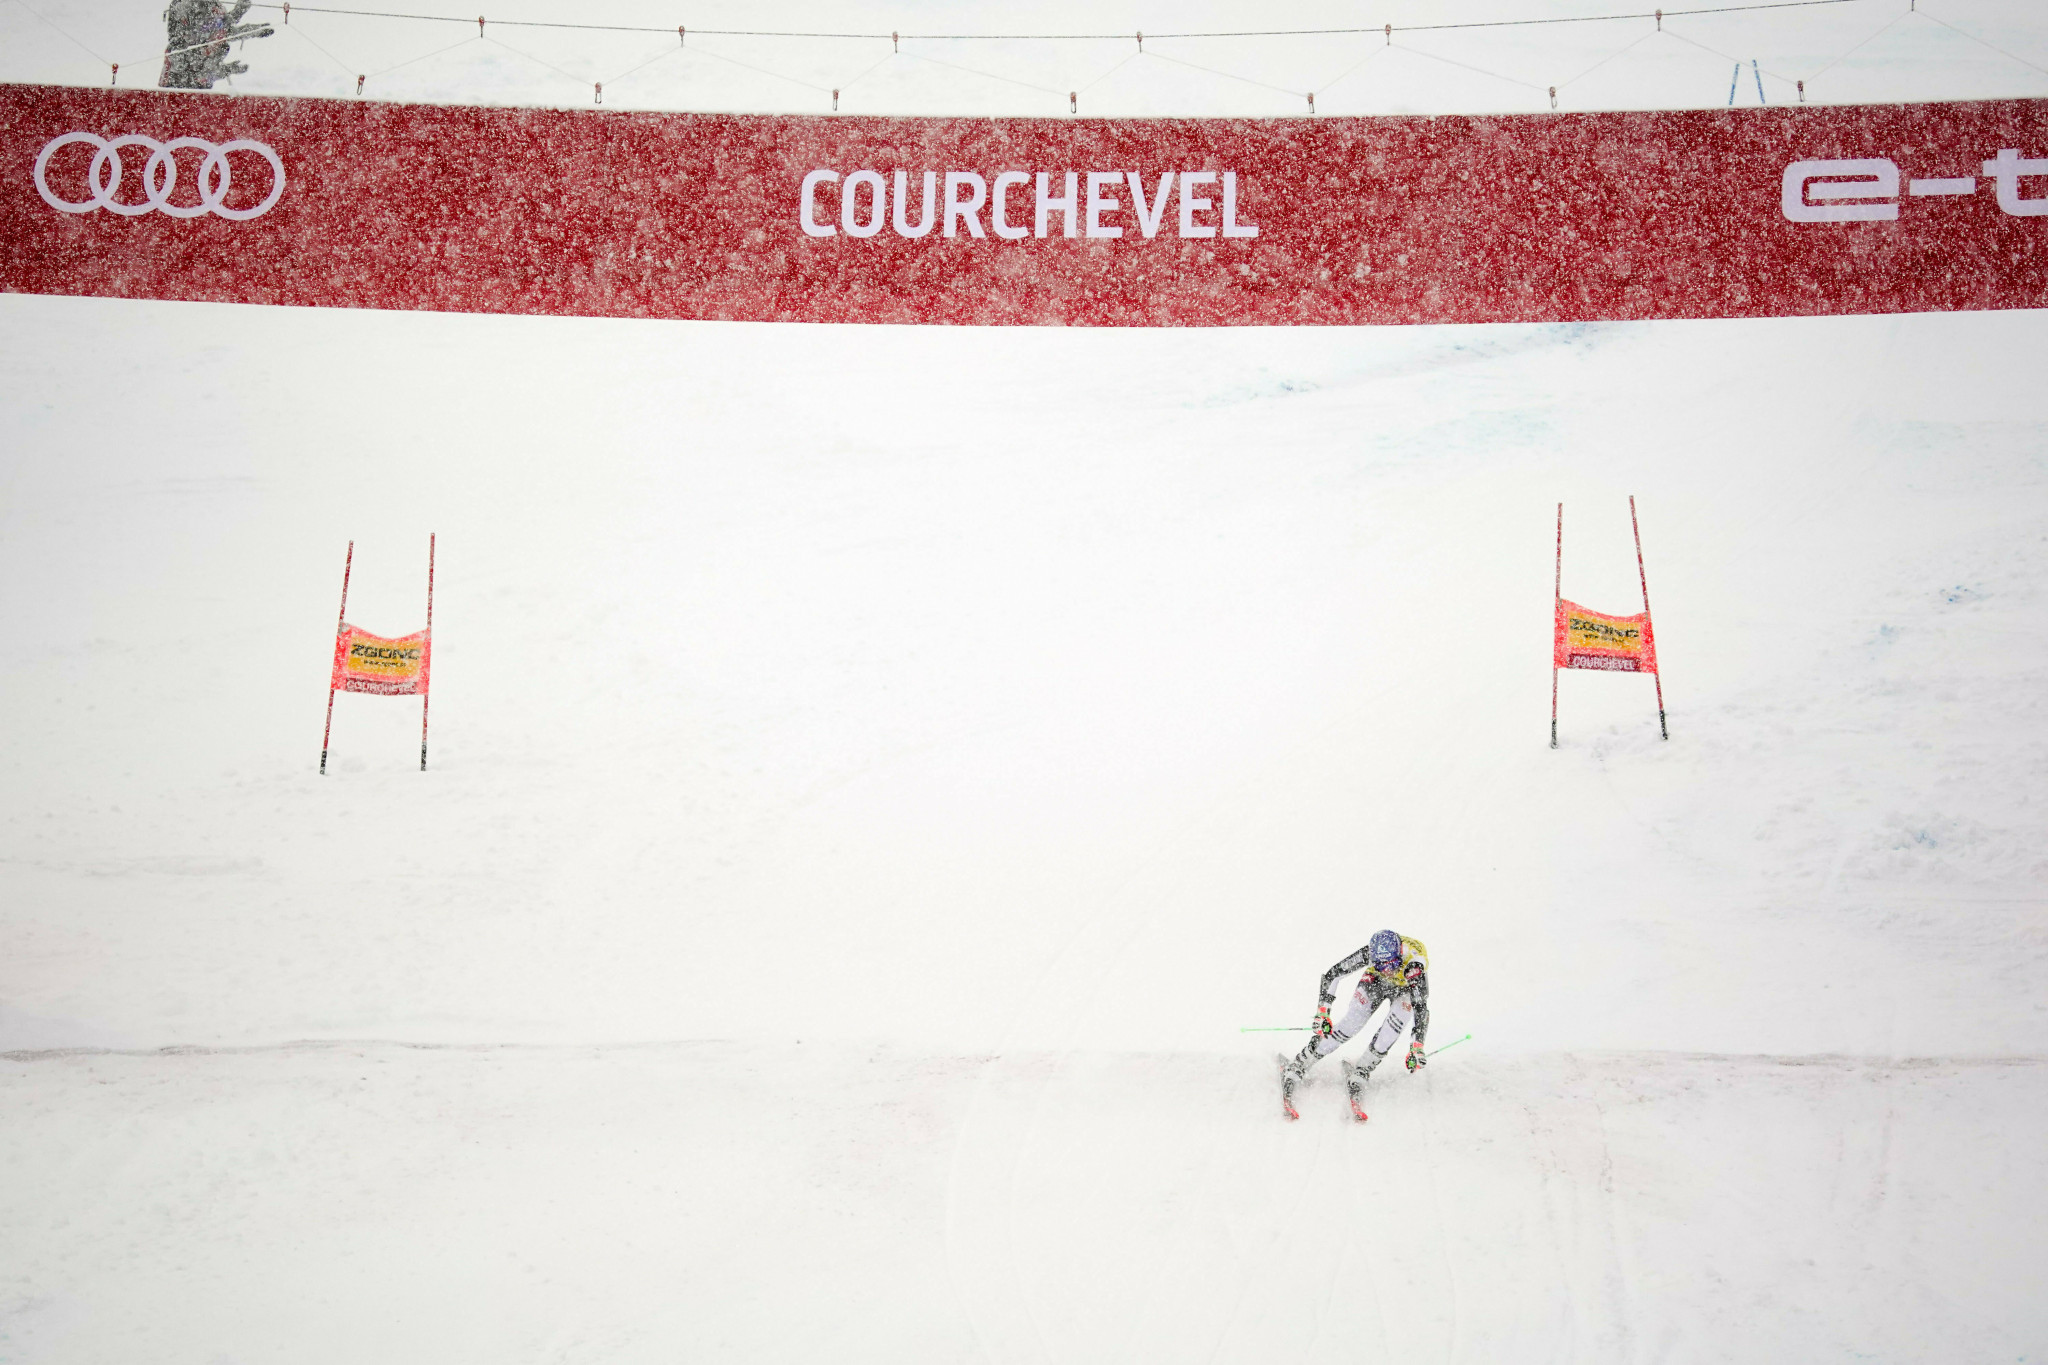 Competition took place in Courchevel yesterday in heavy snowfall ©Getty Images